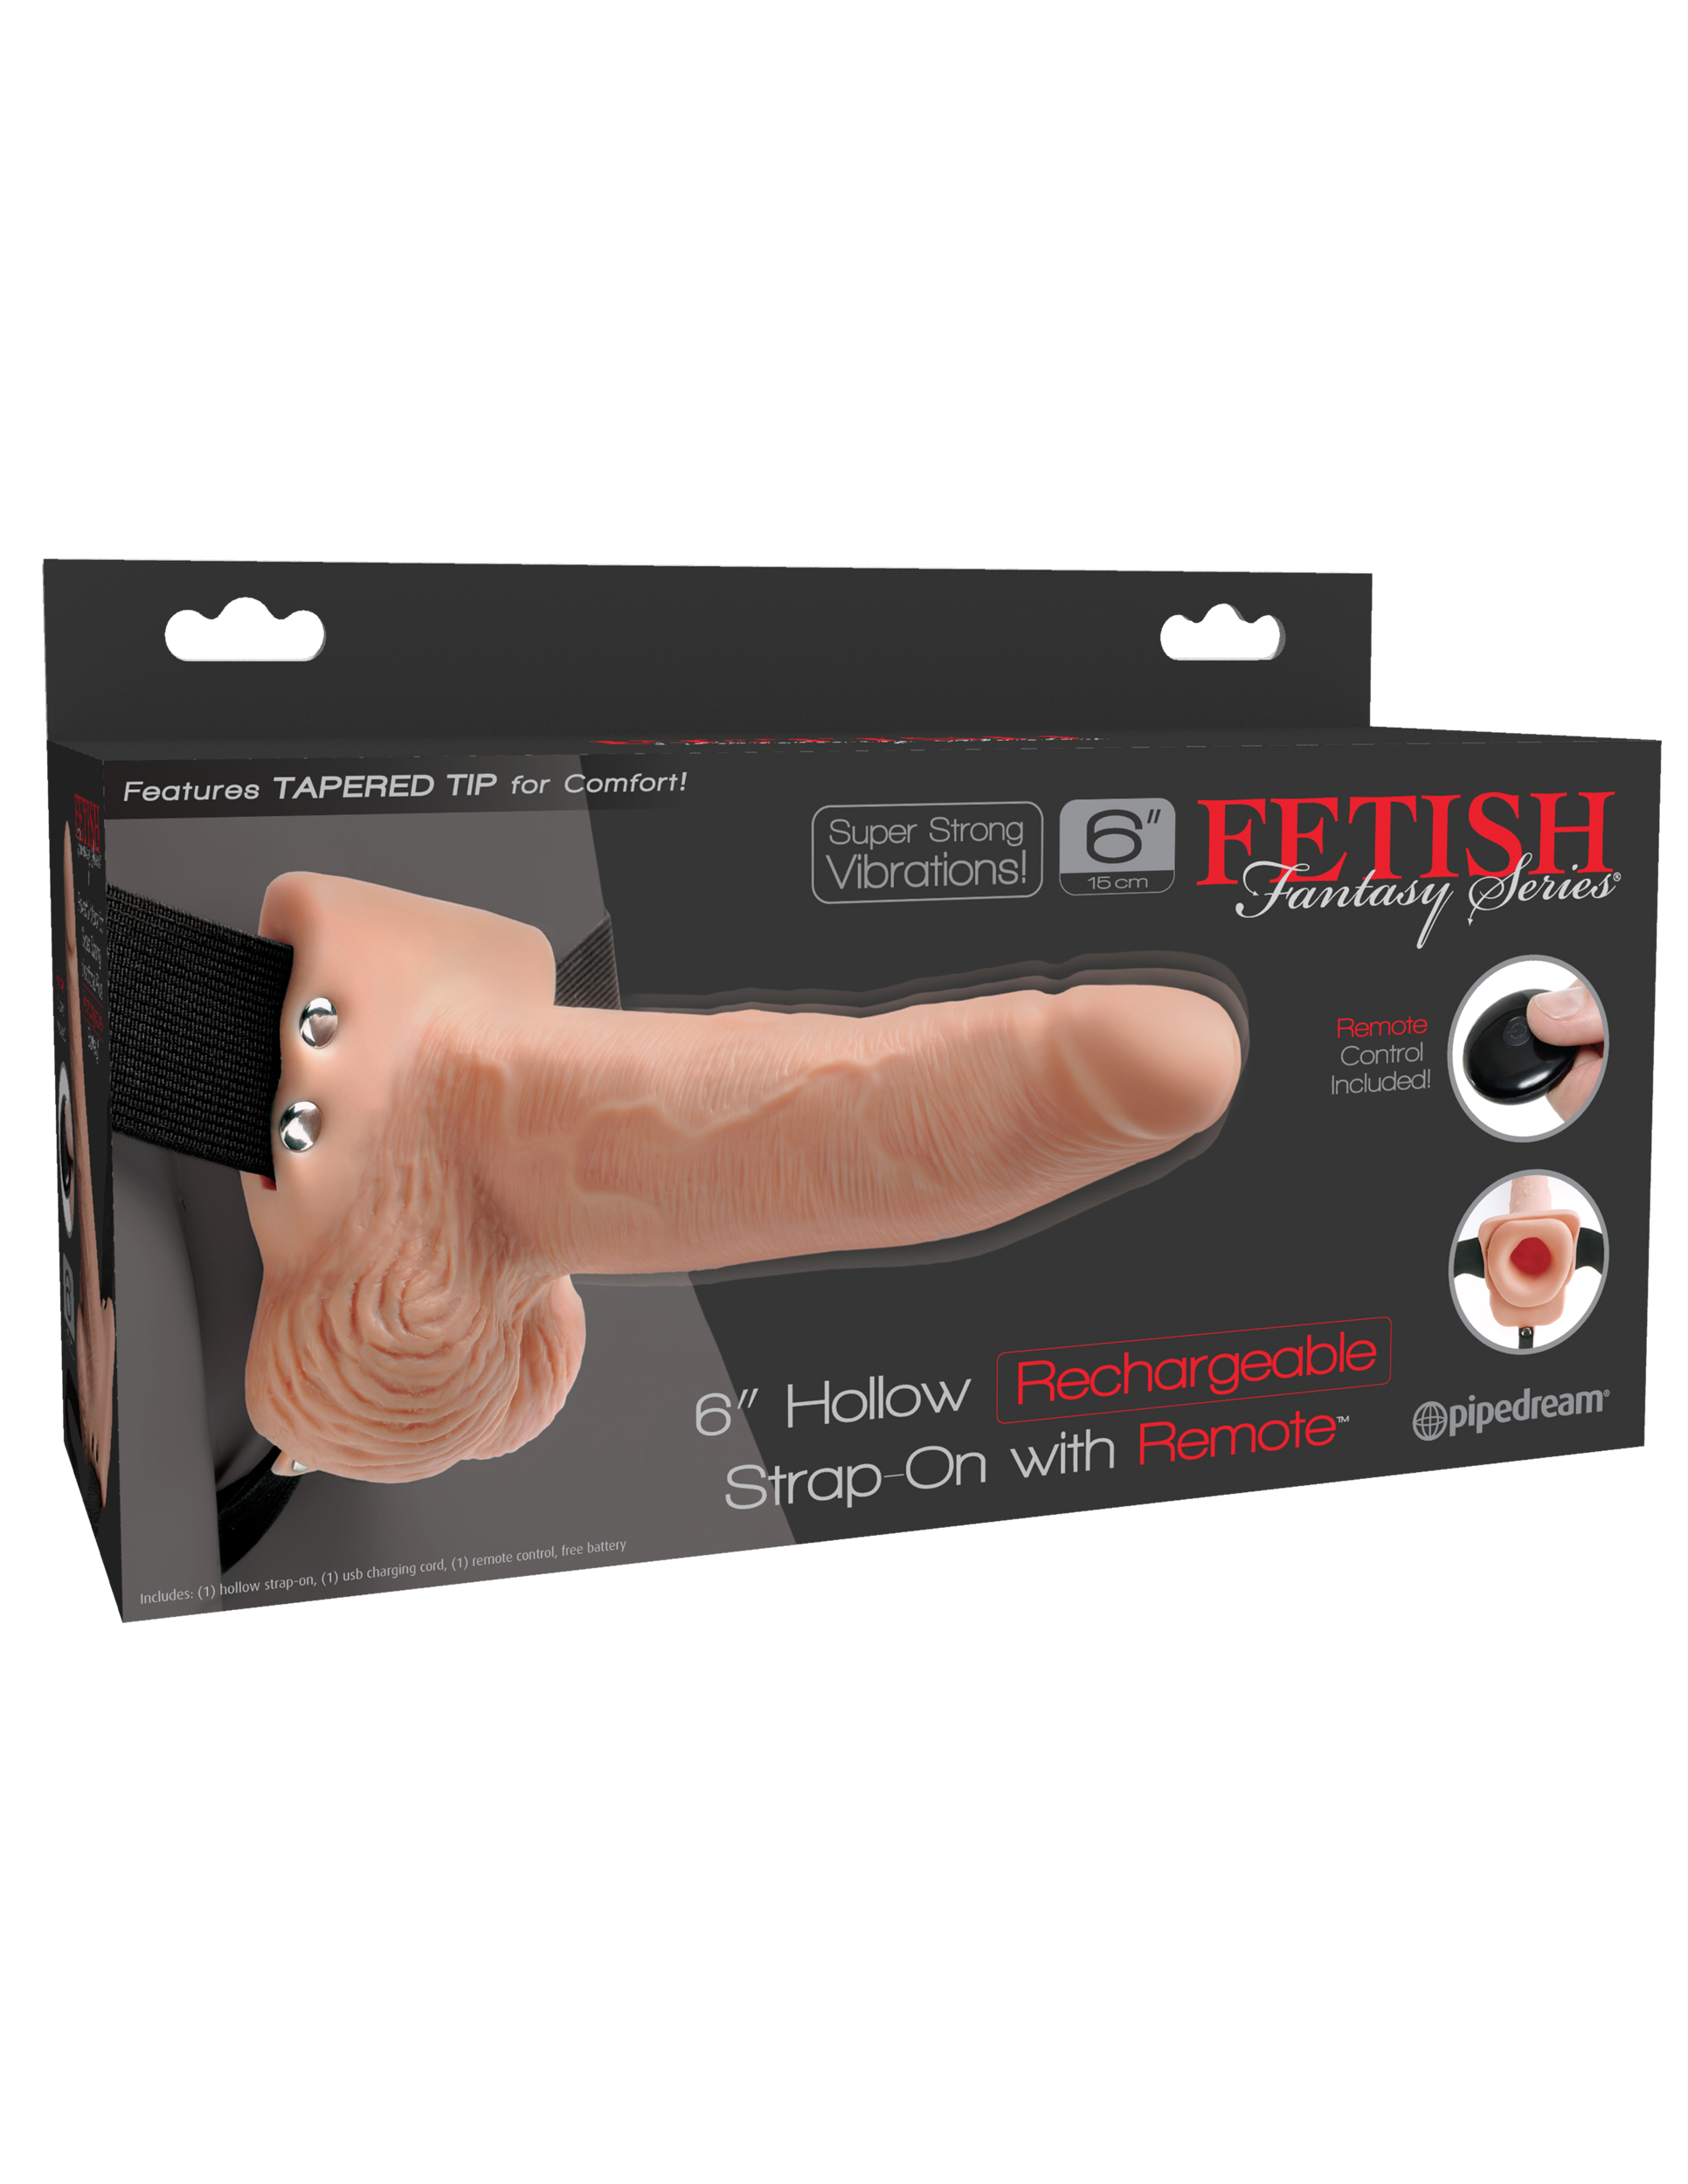 fetish fantasy series  inch hollow rechargeable strap on with remote flesh 